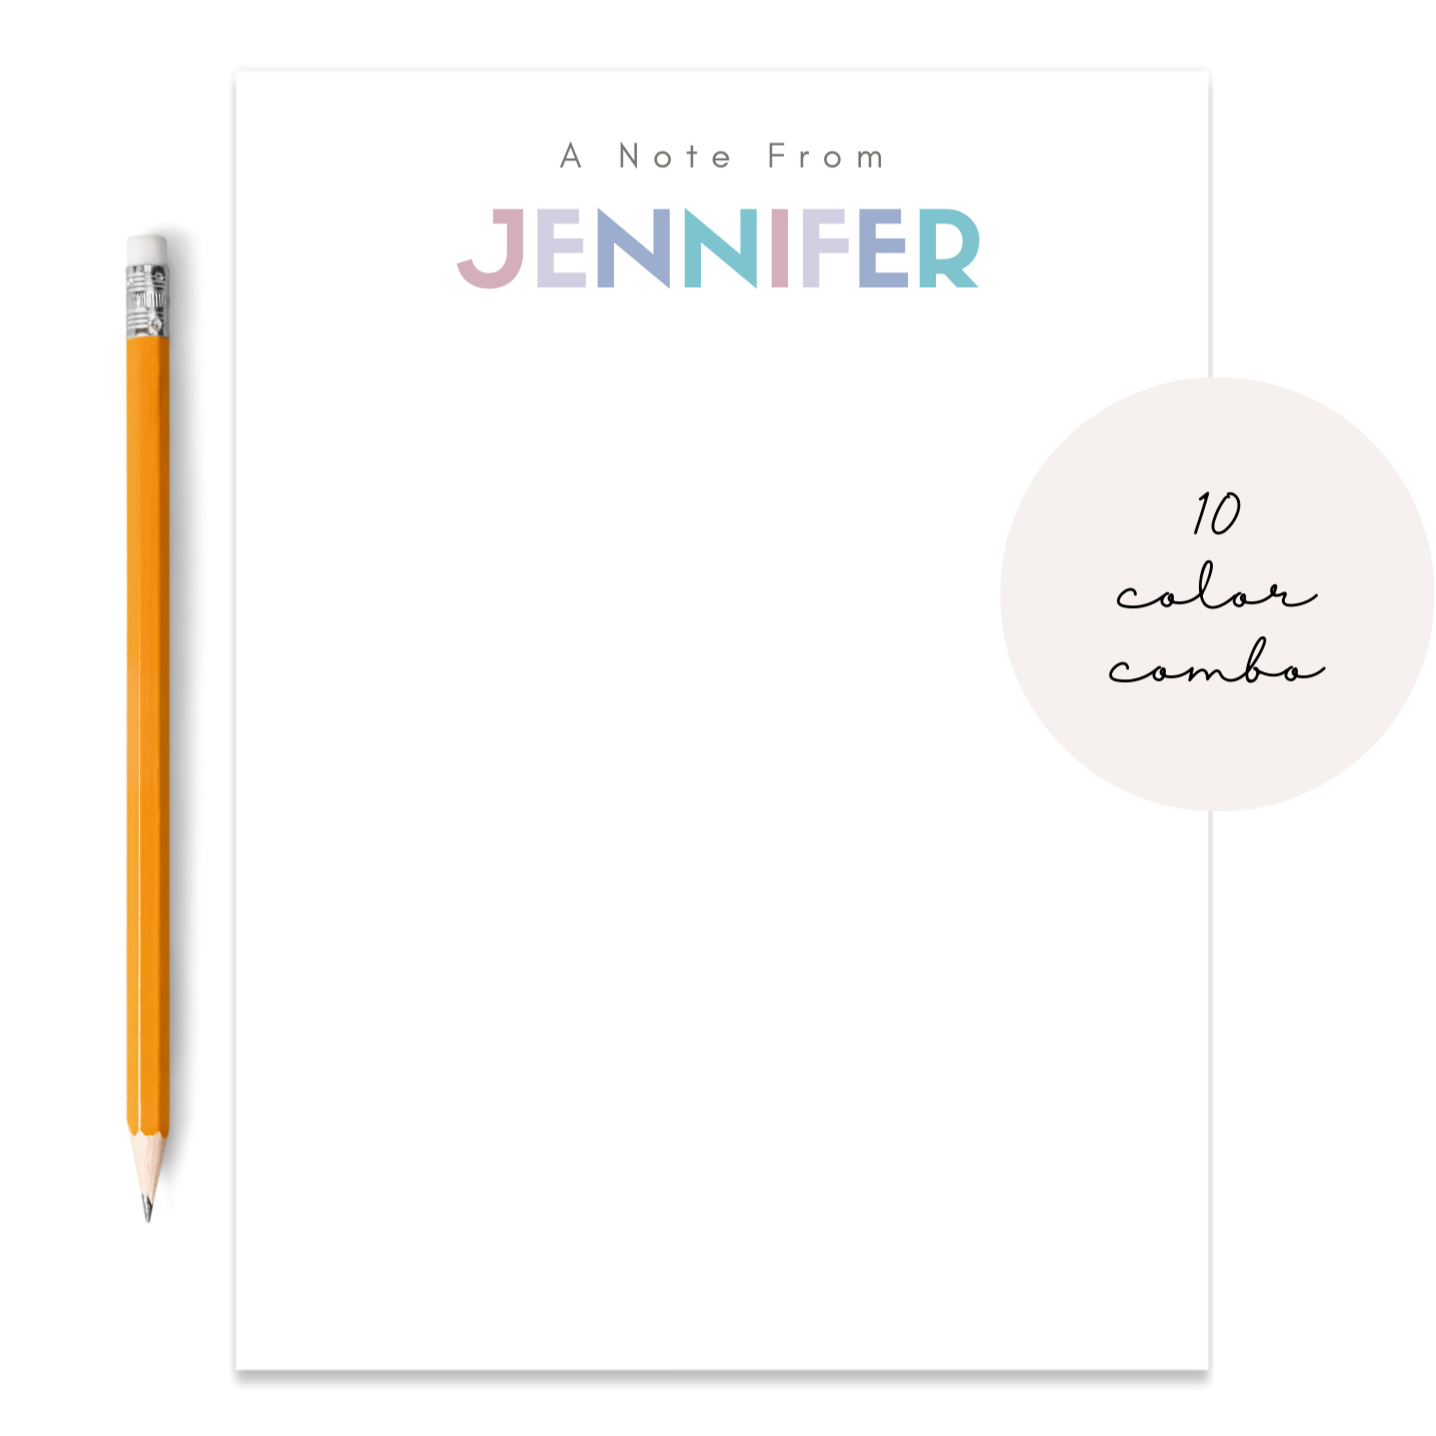 Personalized name notepads. 10 color combinations to choose from to make it even more personalized. Perfect for a friend, teacher, boss, employee, or anyone! Wrapped in cellophane, ready for gifting. Available in two sizes.